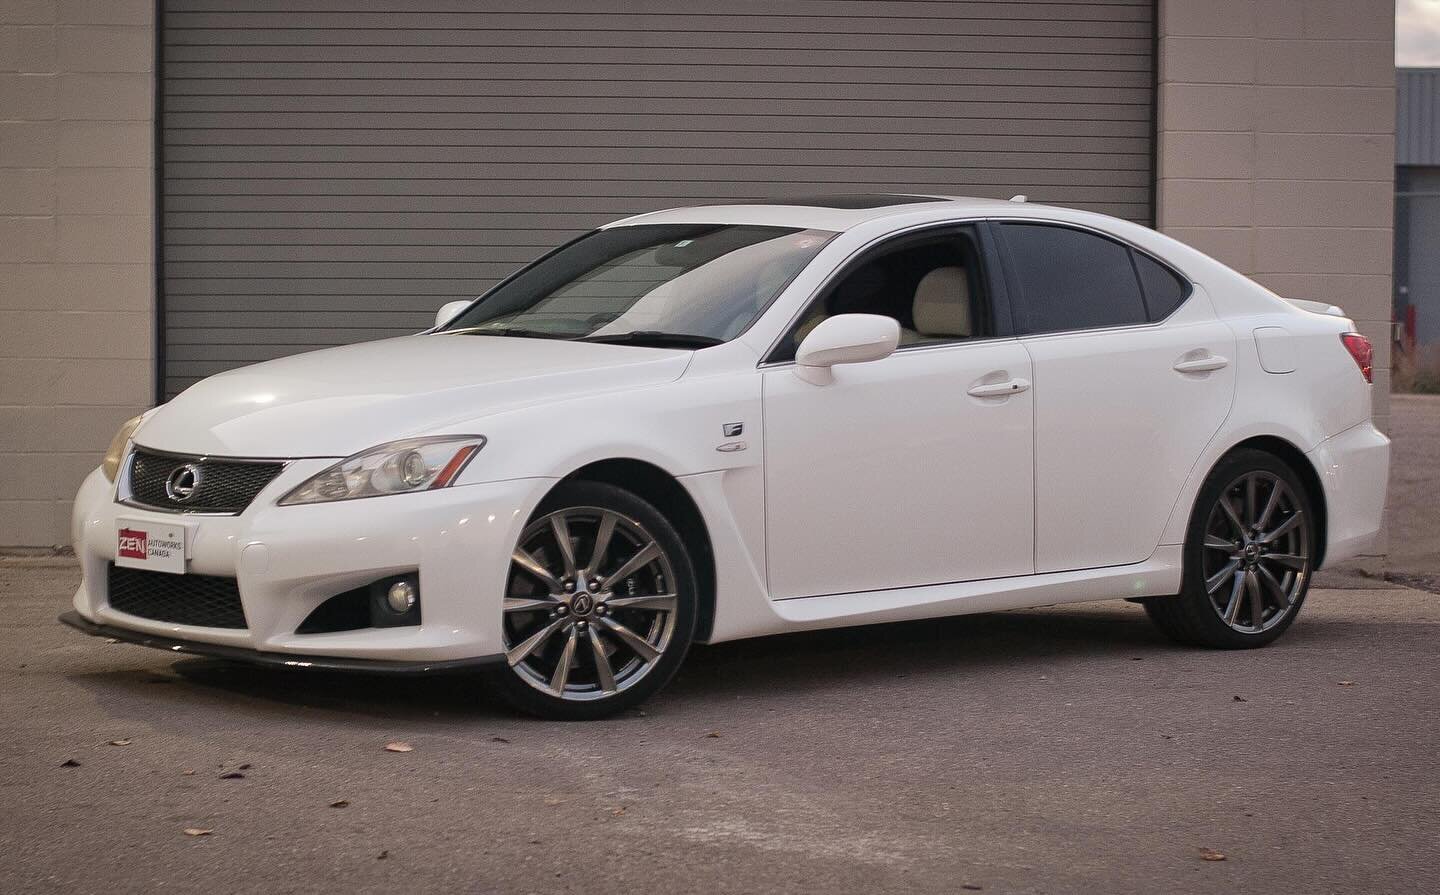 2008 Lexus IS-F 

Another super tidy Lexus purchased out of Japan&rsquo;s dealer auctions network and imported for our good friend in Calgary.

420hp 5.0L V8 RWD 
76,000km

______________________
FOR MORE INFORMATION
Call 403-618-3506
Email info@zena